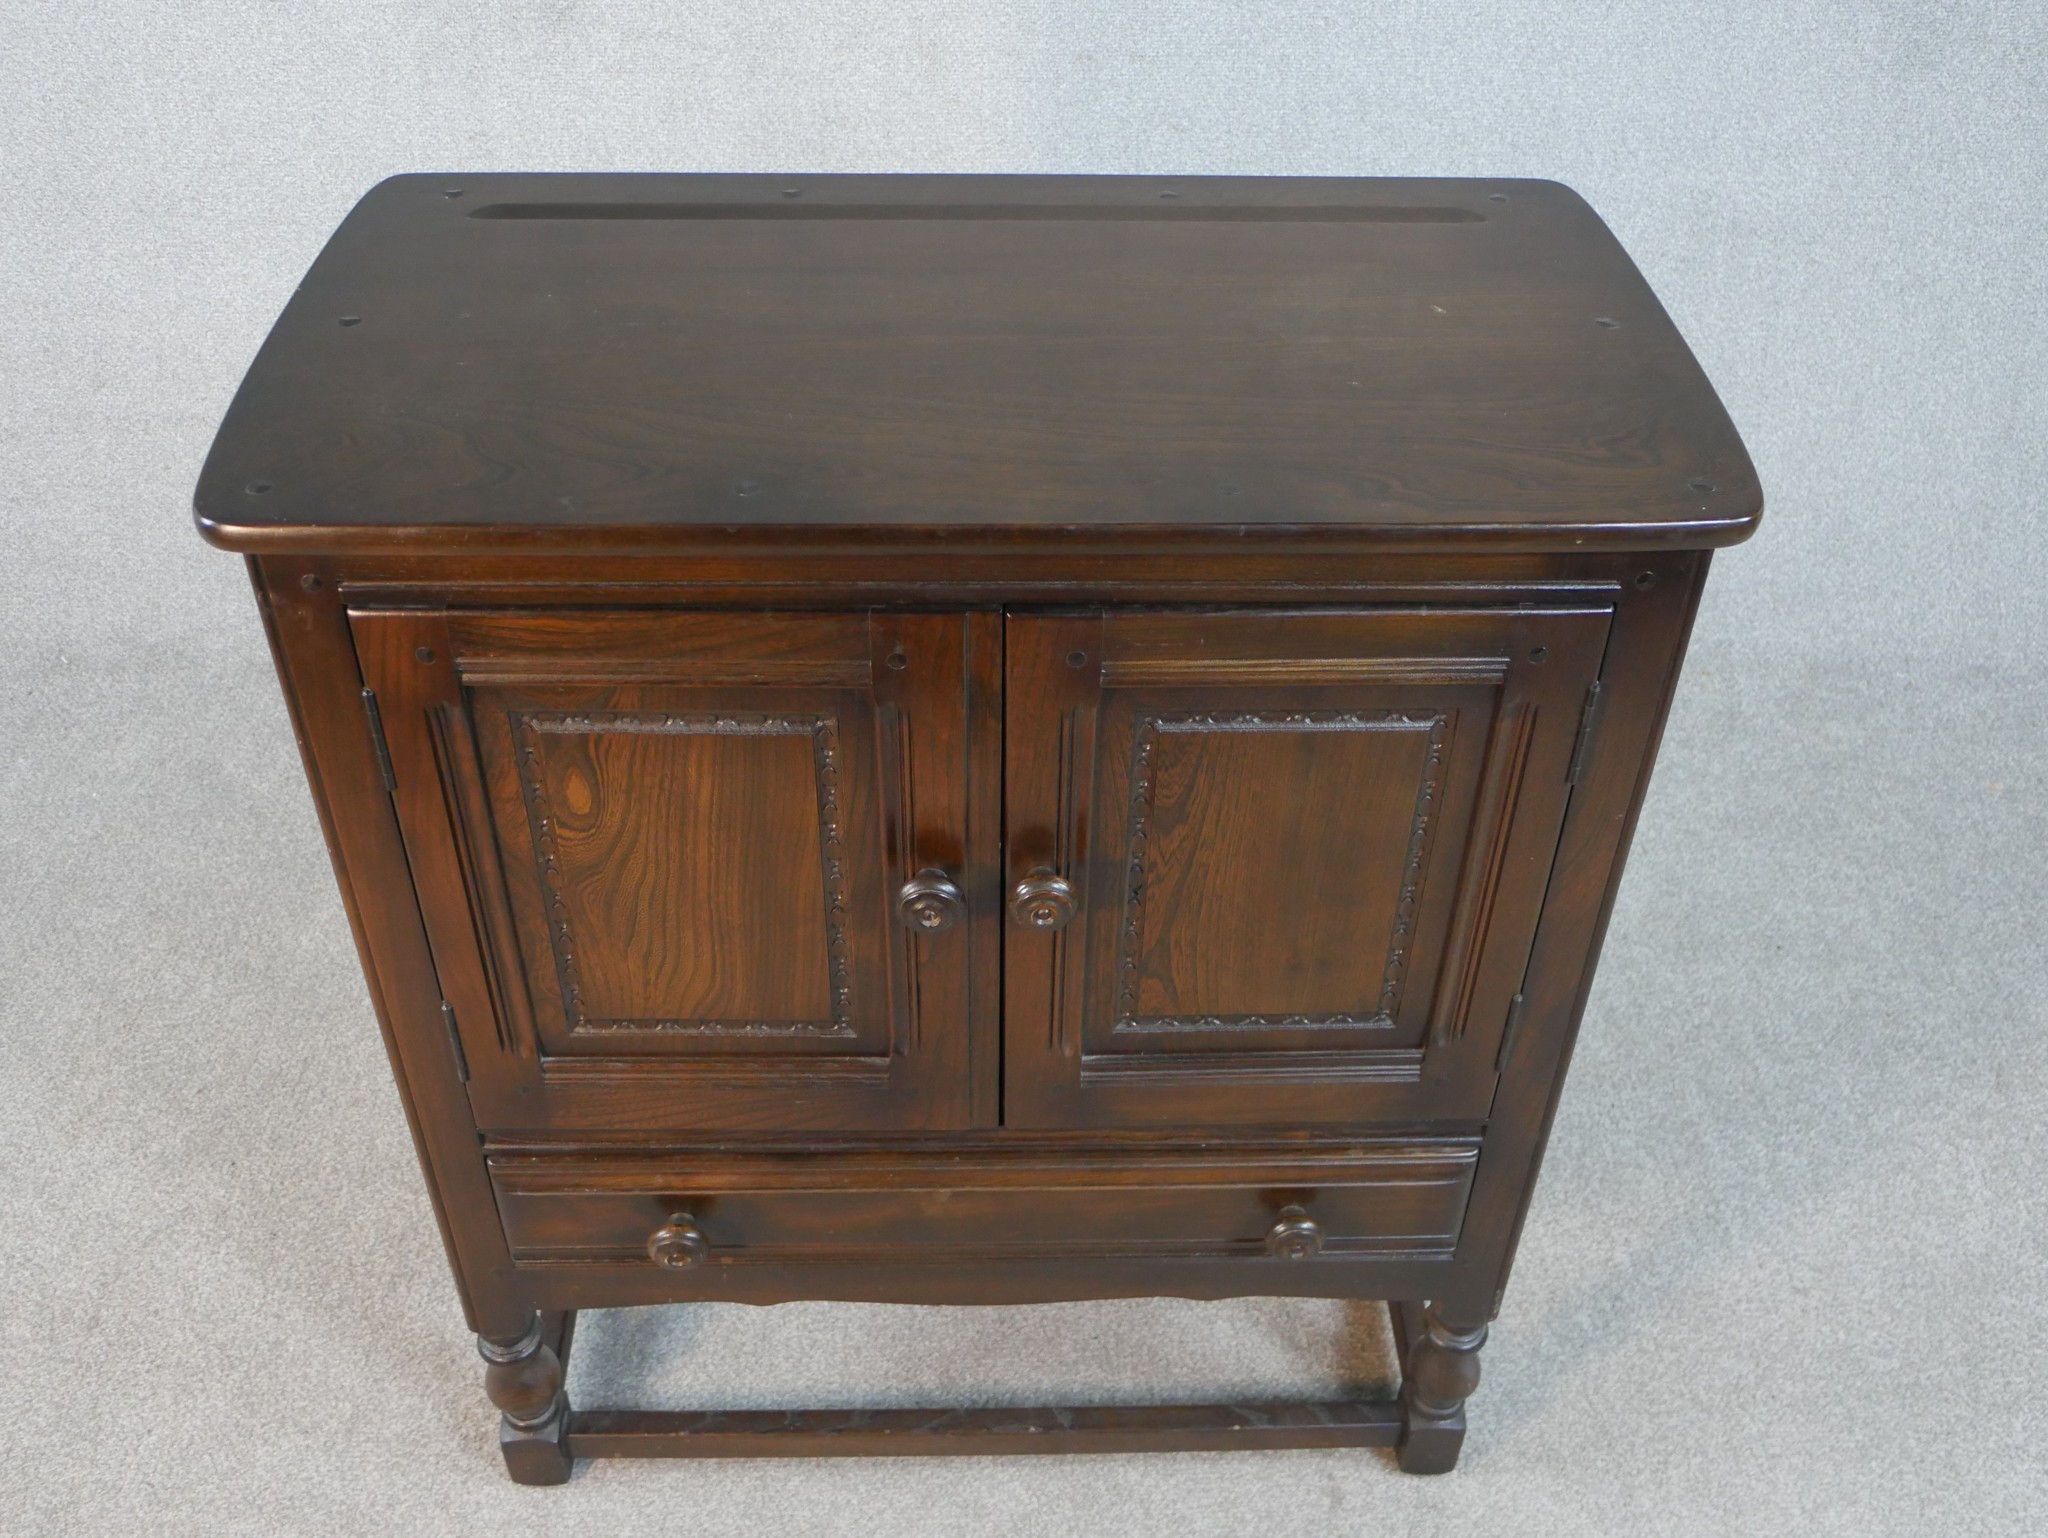 A mid century oak Ercol cabinet in the country antique style. H.70 W.103 D.50cm - Image 2 of 5